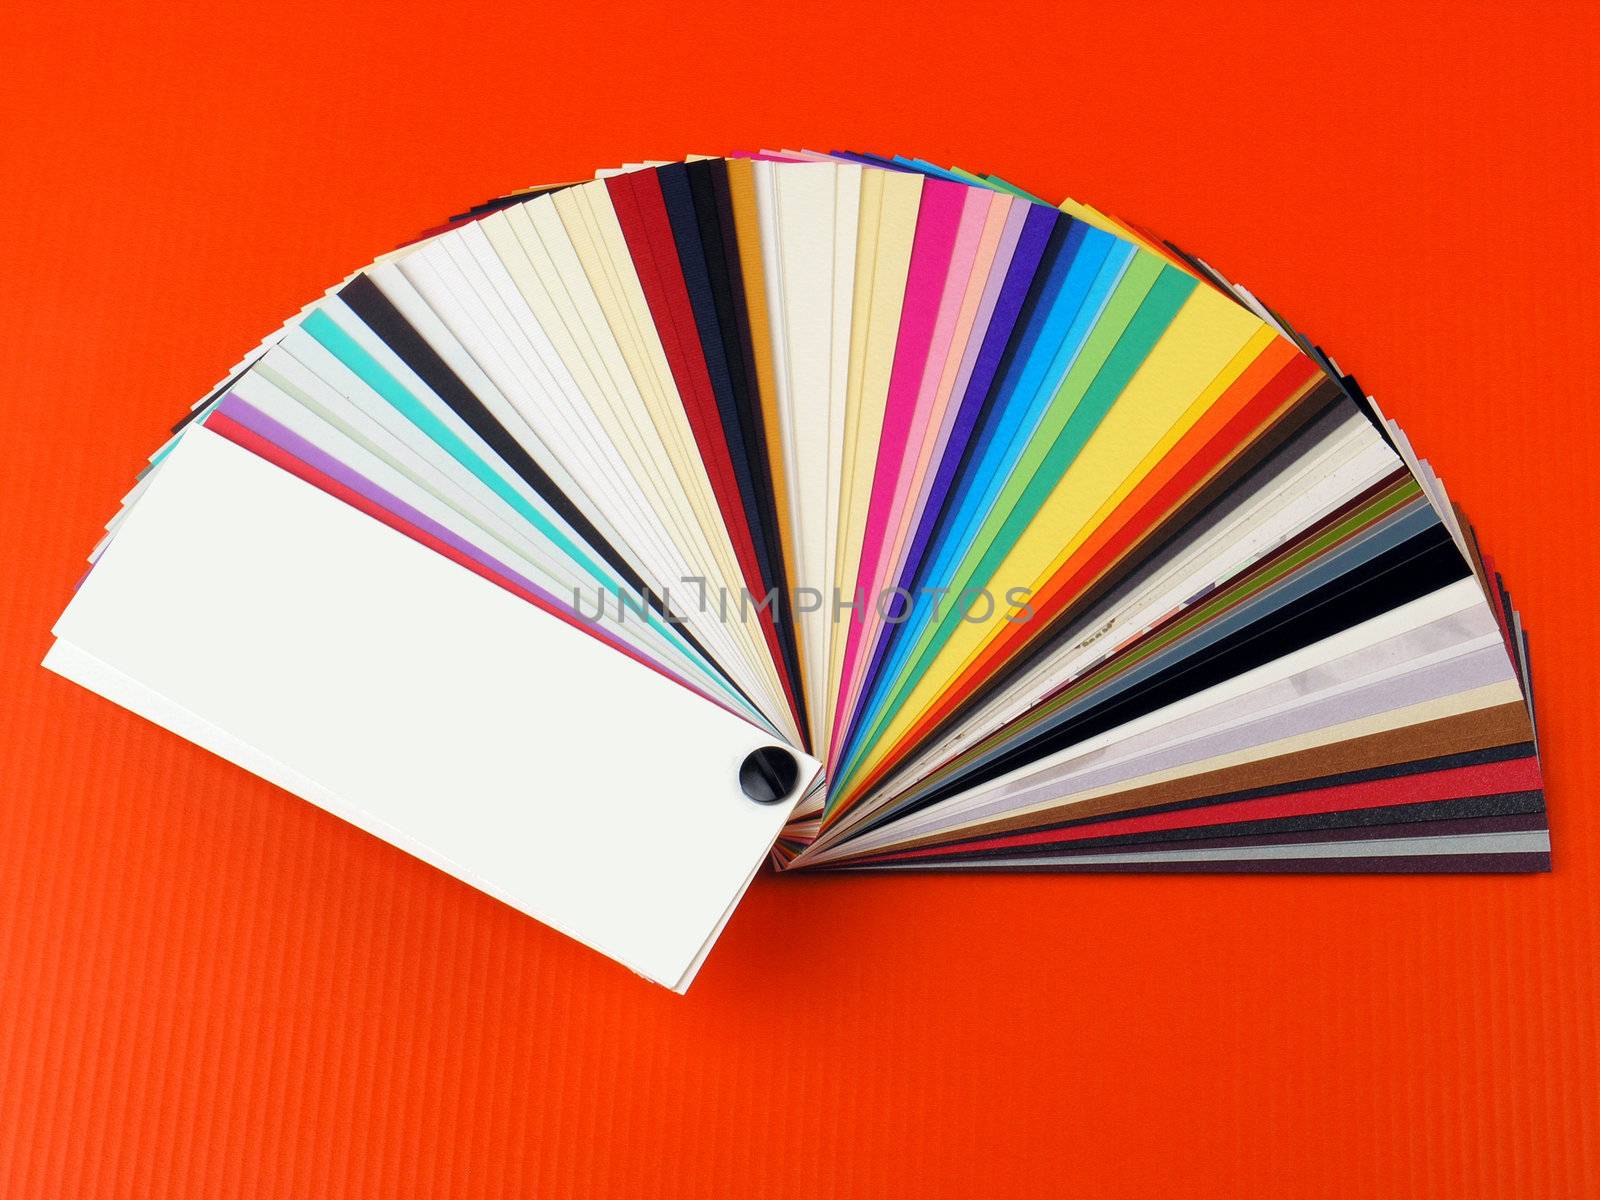 Colored samples of different papers on white background, business cards